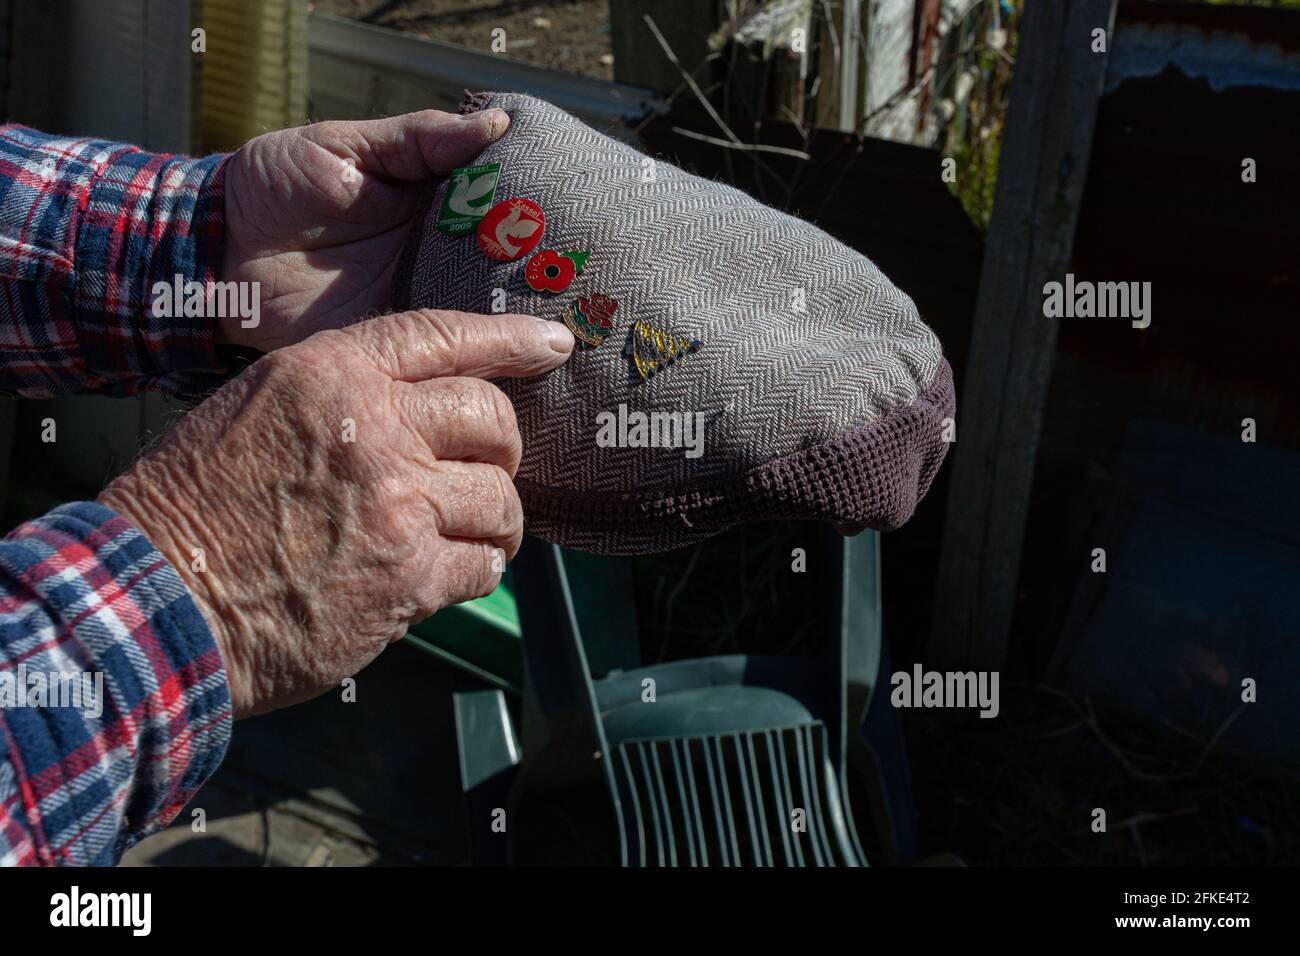 In British popular culture, the flat cap is typically associated with older working-class men. pigeon fanciers with pigeon embroidery on his cap. Stock Photo